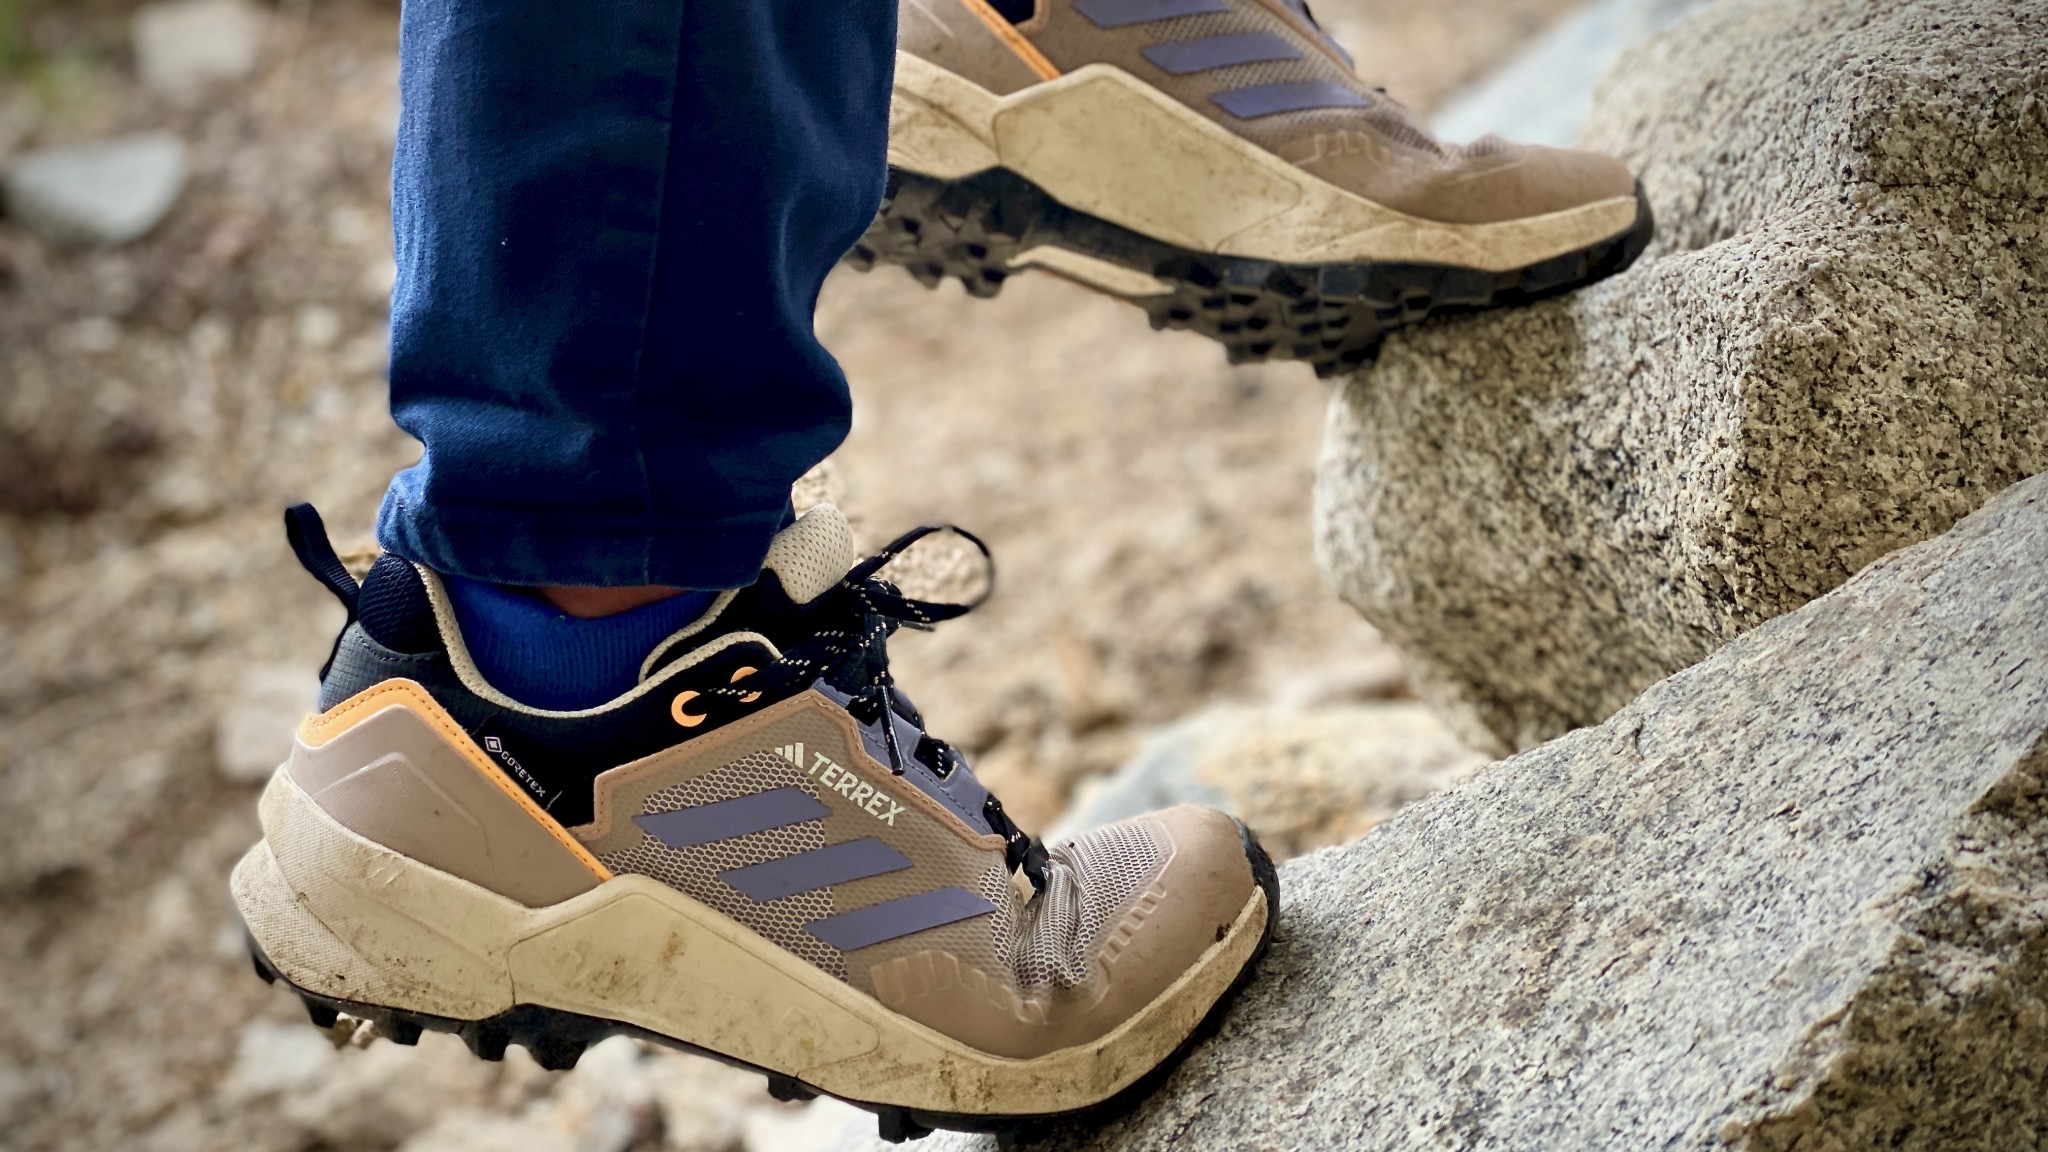 Adidas Terrex Swift R3 Gore-Tex - Women's Review | Tested